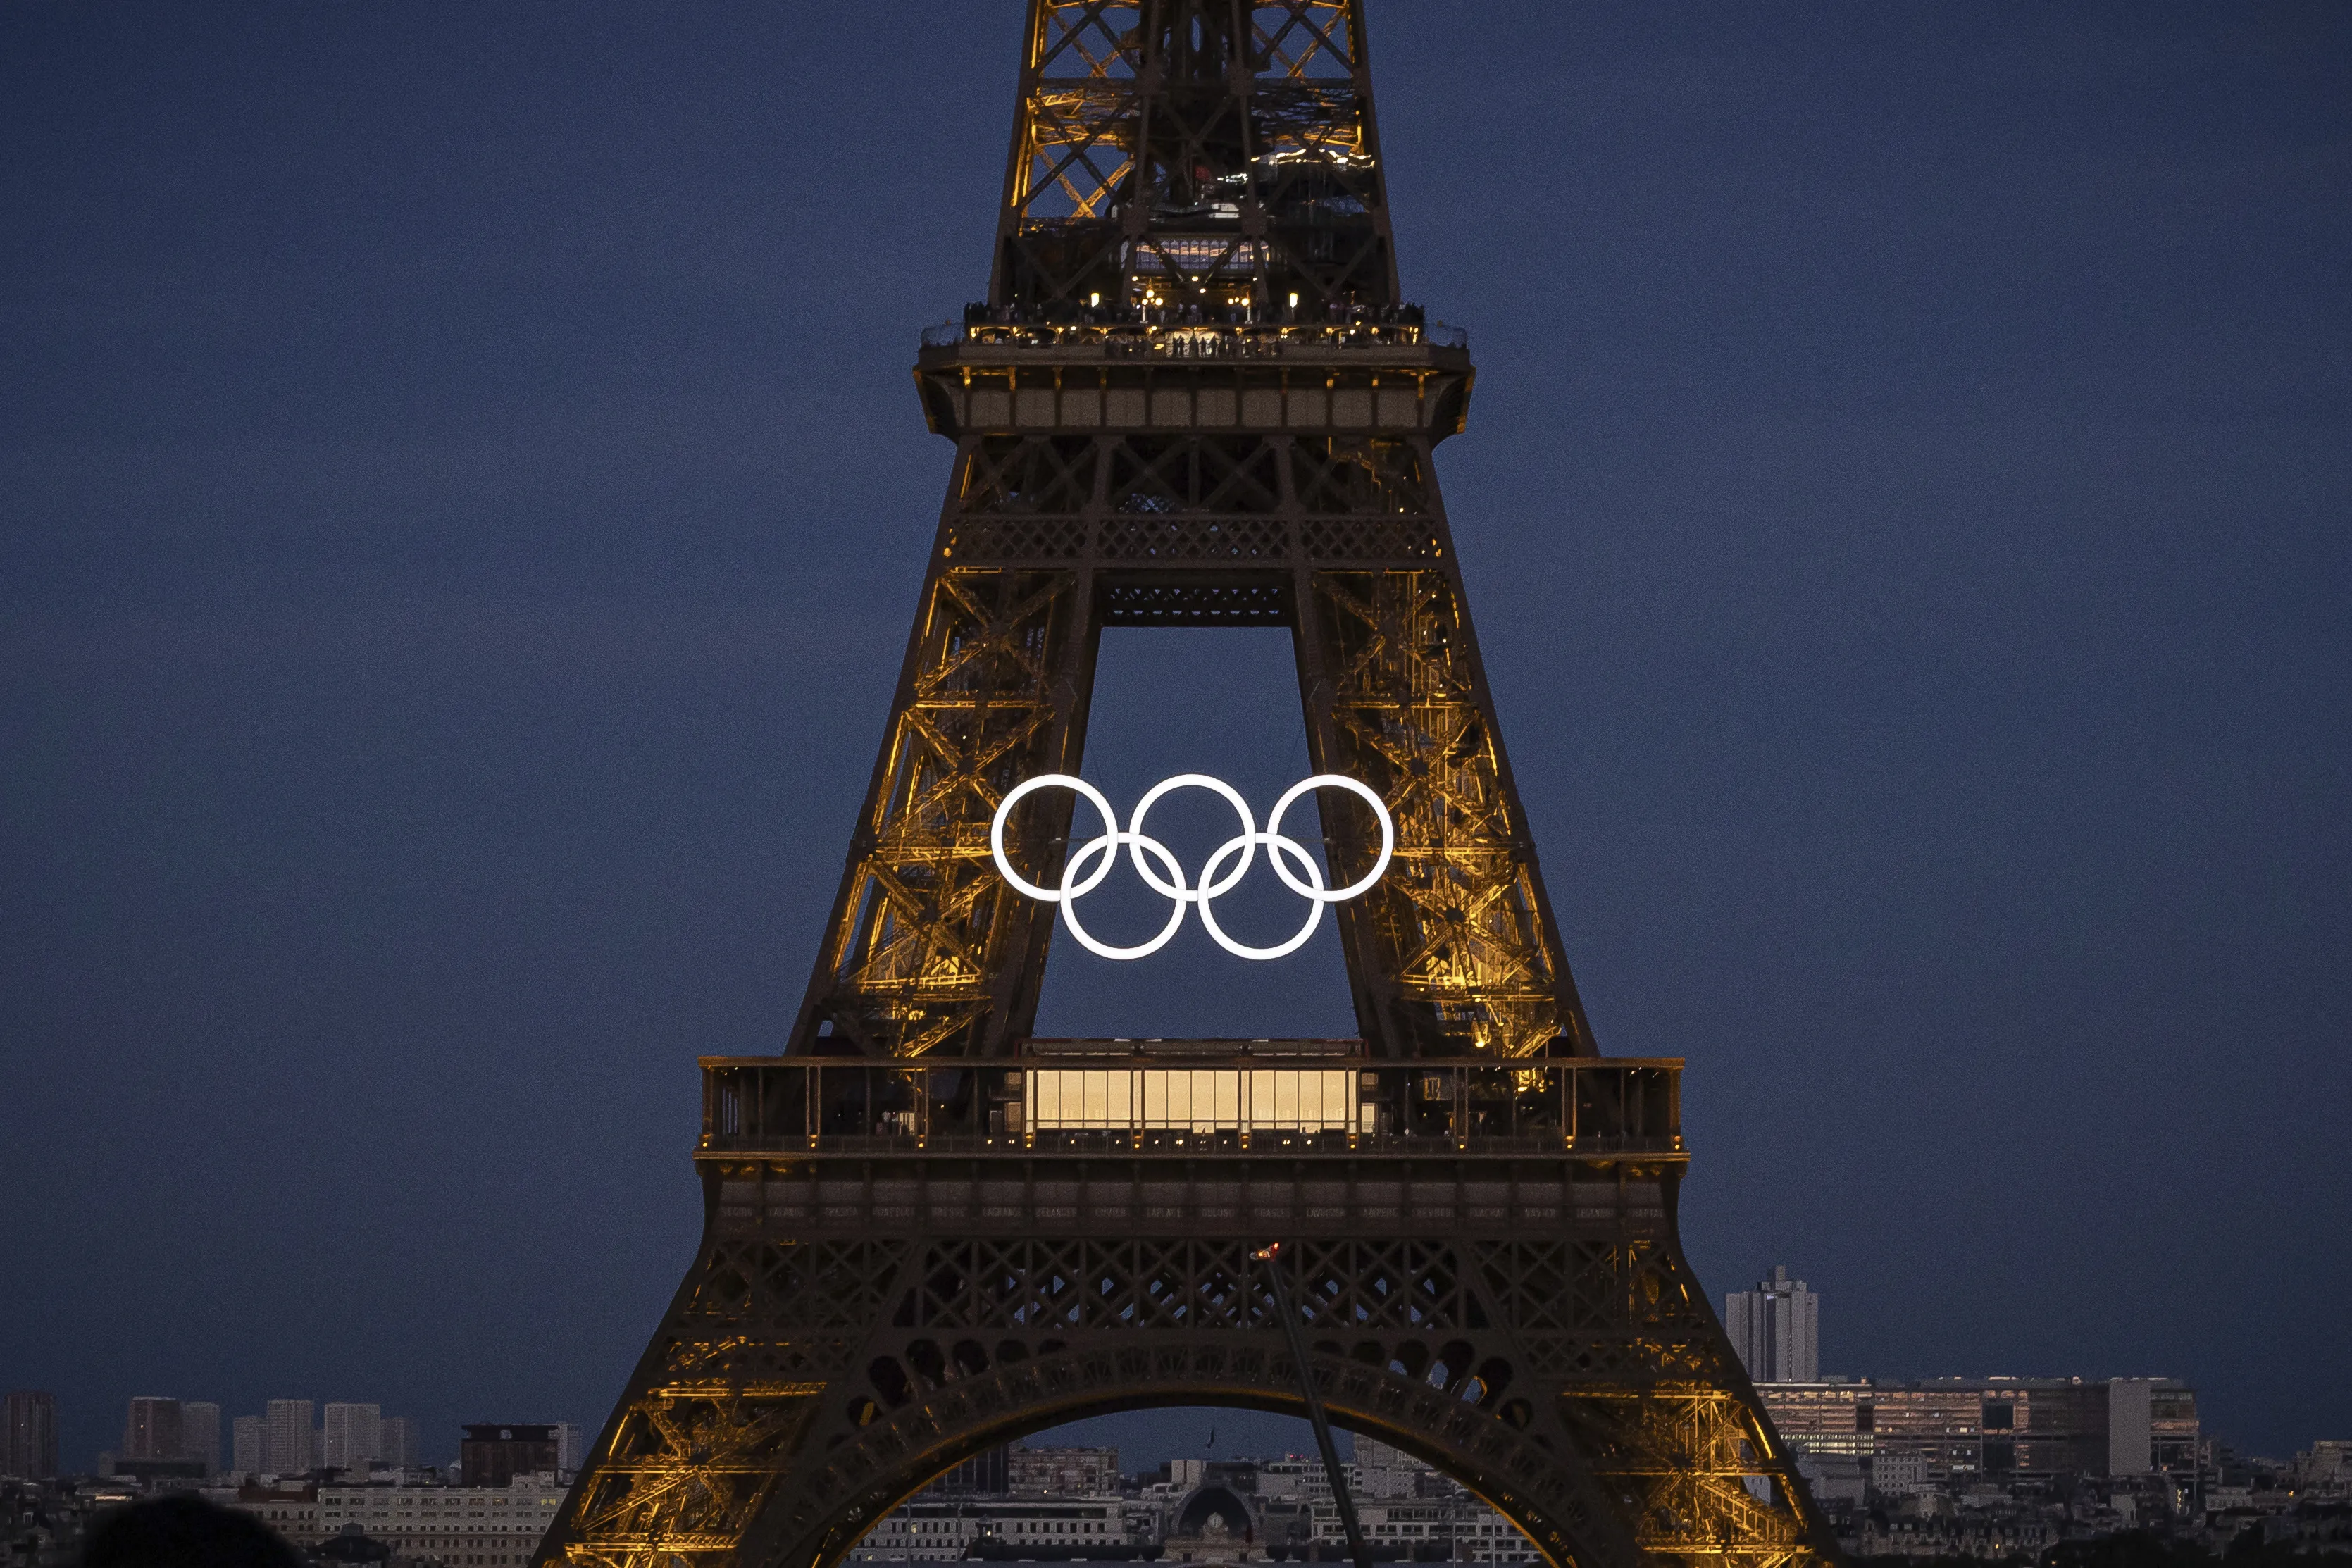 The Olympic rings are seen on the Eiffel Tower Friday, June 7, 2024, in Paris. The Paris Olympics organizers mounted the rings on the Eiffel Tower on Friday as the French capital marks 50 days until the start of the Summer Games. The 95-foot-long and 43-foot-high structure of five rings, made entirely of recycled French steel, will be displayed on the south side of the 135-year-old historic landmark in central Paris, overlooking the Seine River. (AP Photo/Aurelien Morissard)